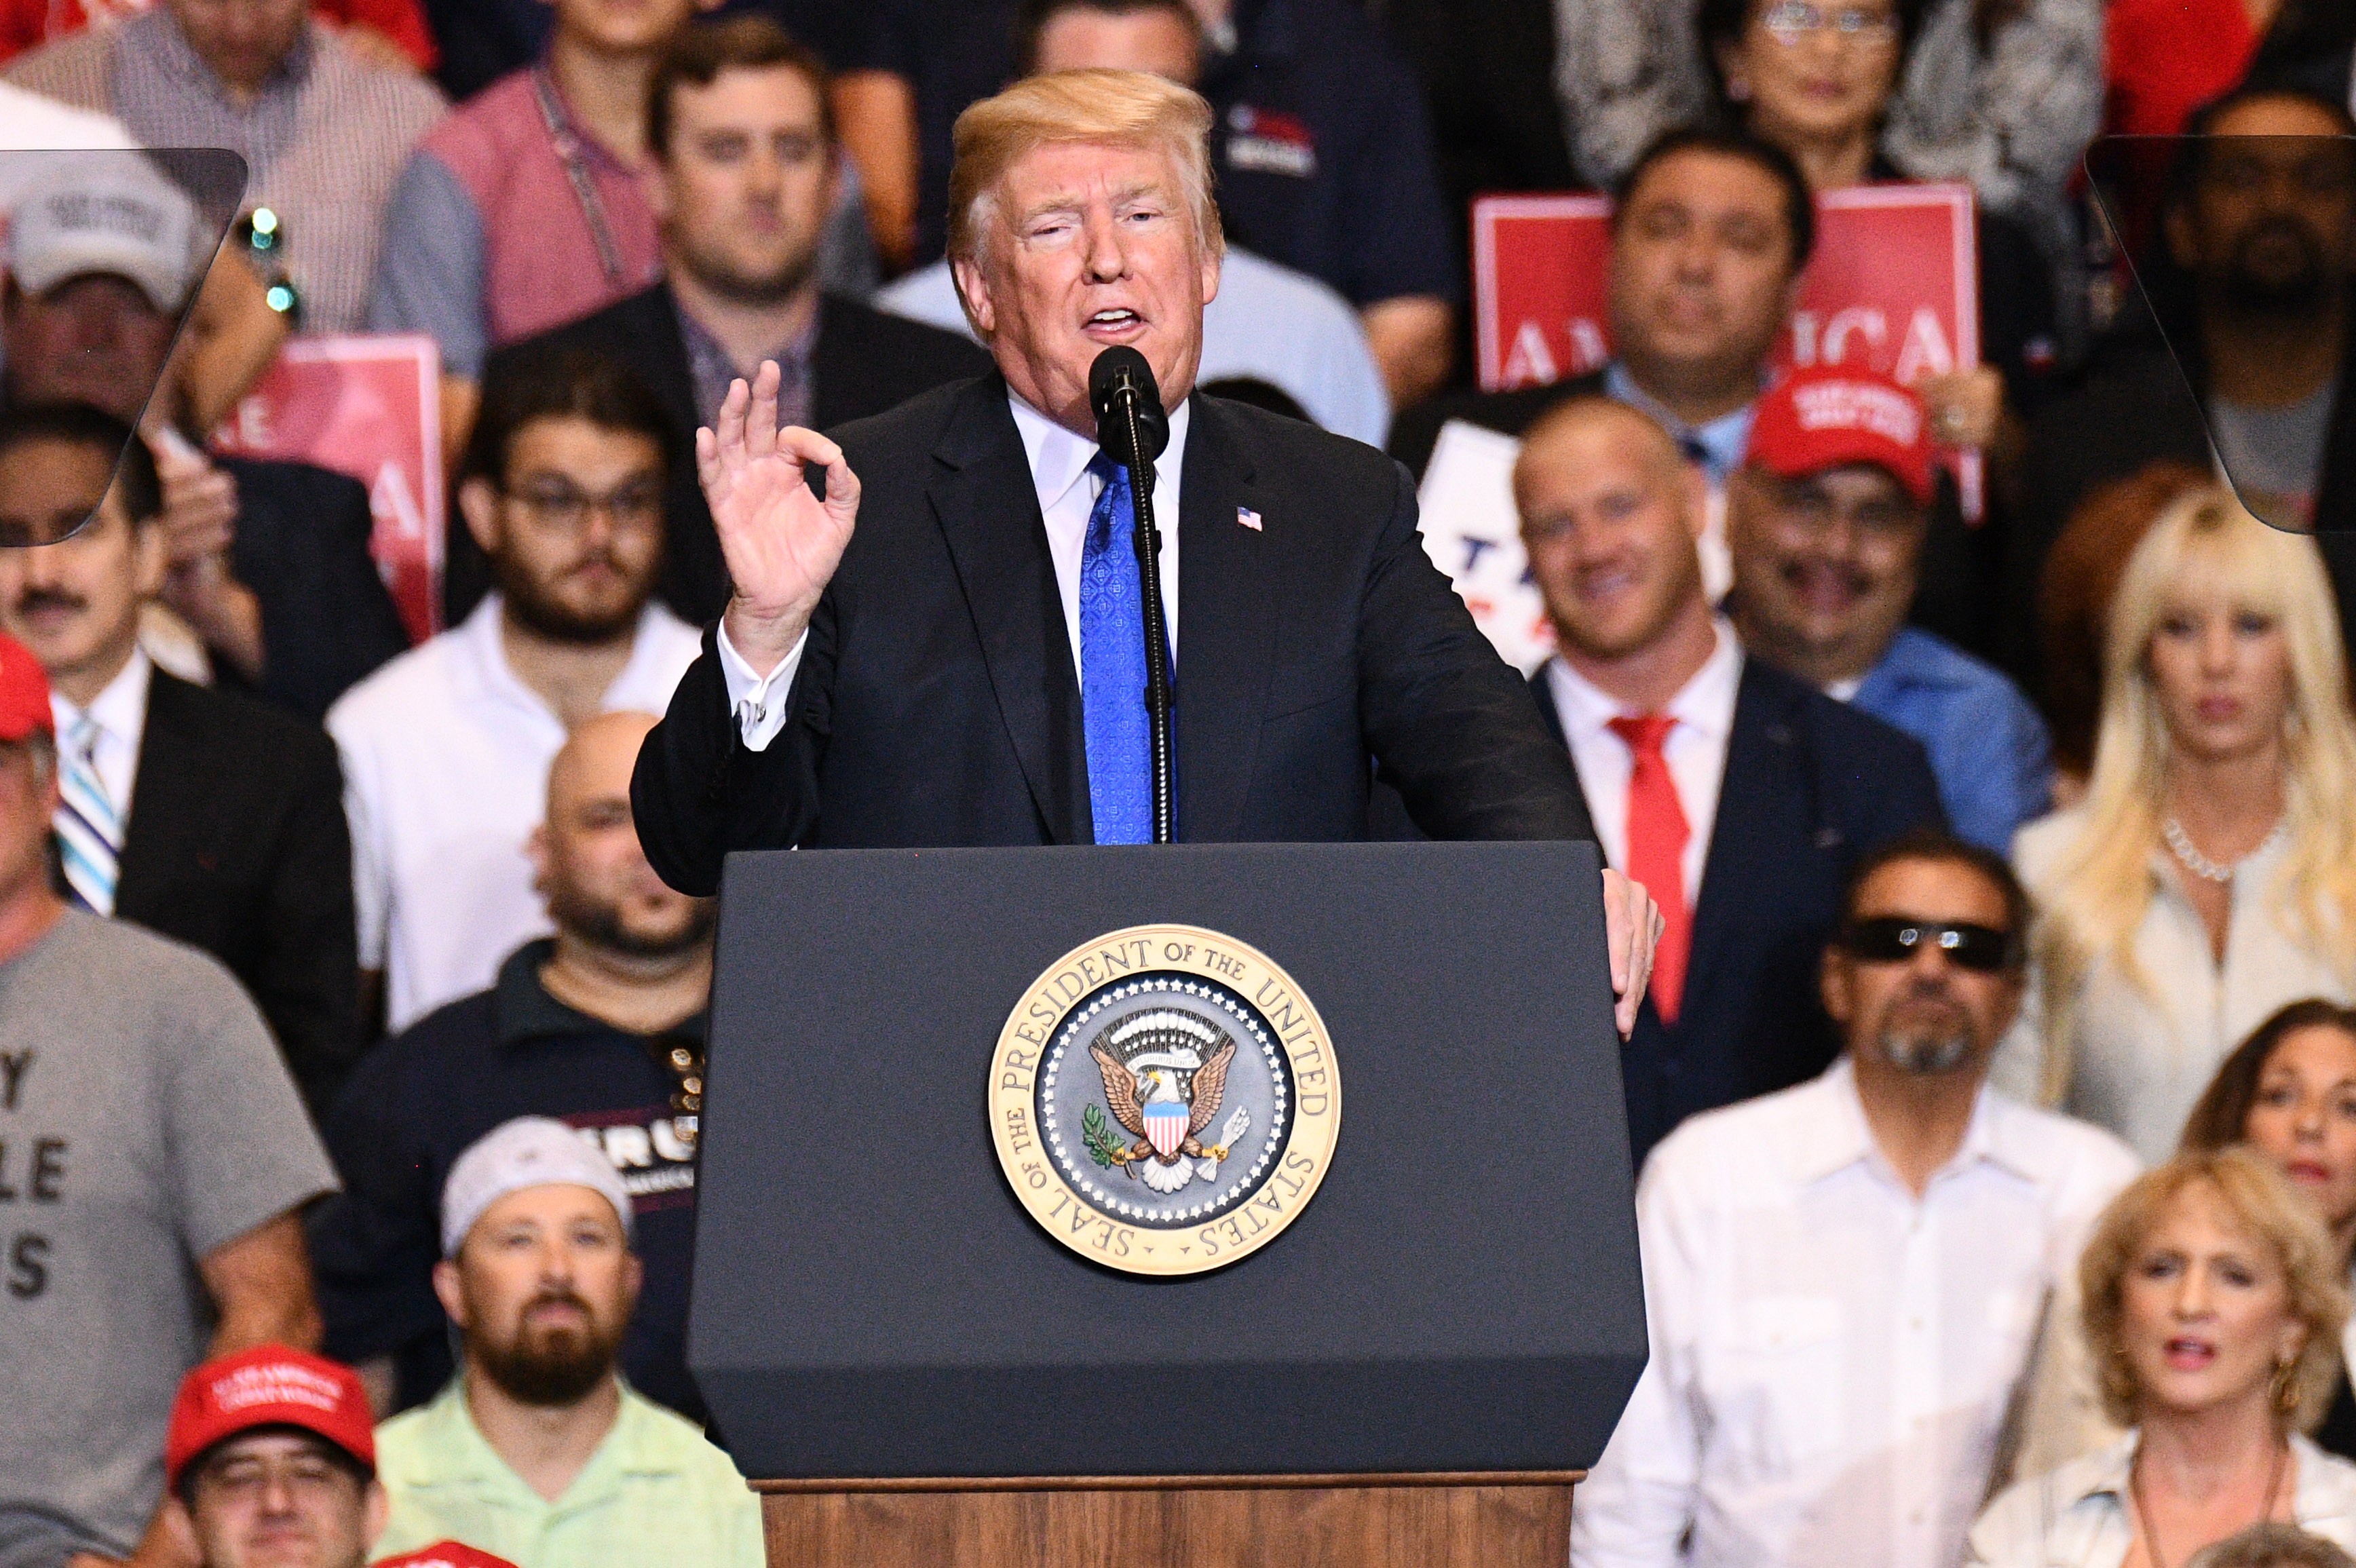 US President Donald Trump speaks at a rally in Las Vegas on September 20. Trump continued to hit out at China days after announcing another round of tariffs, signalling that the trade war won't end any time soon. Photo: Bloomberg